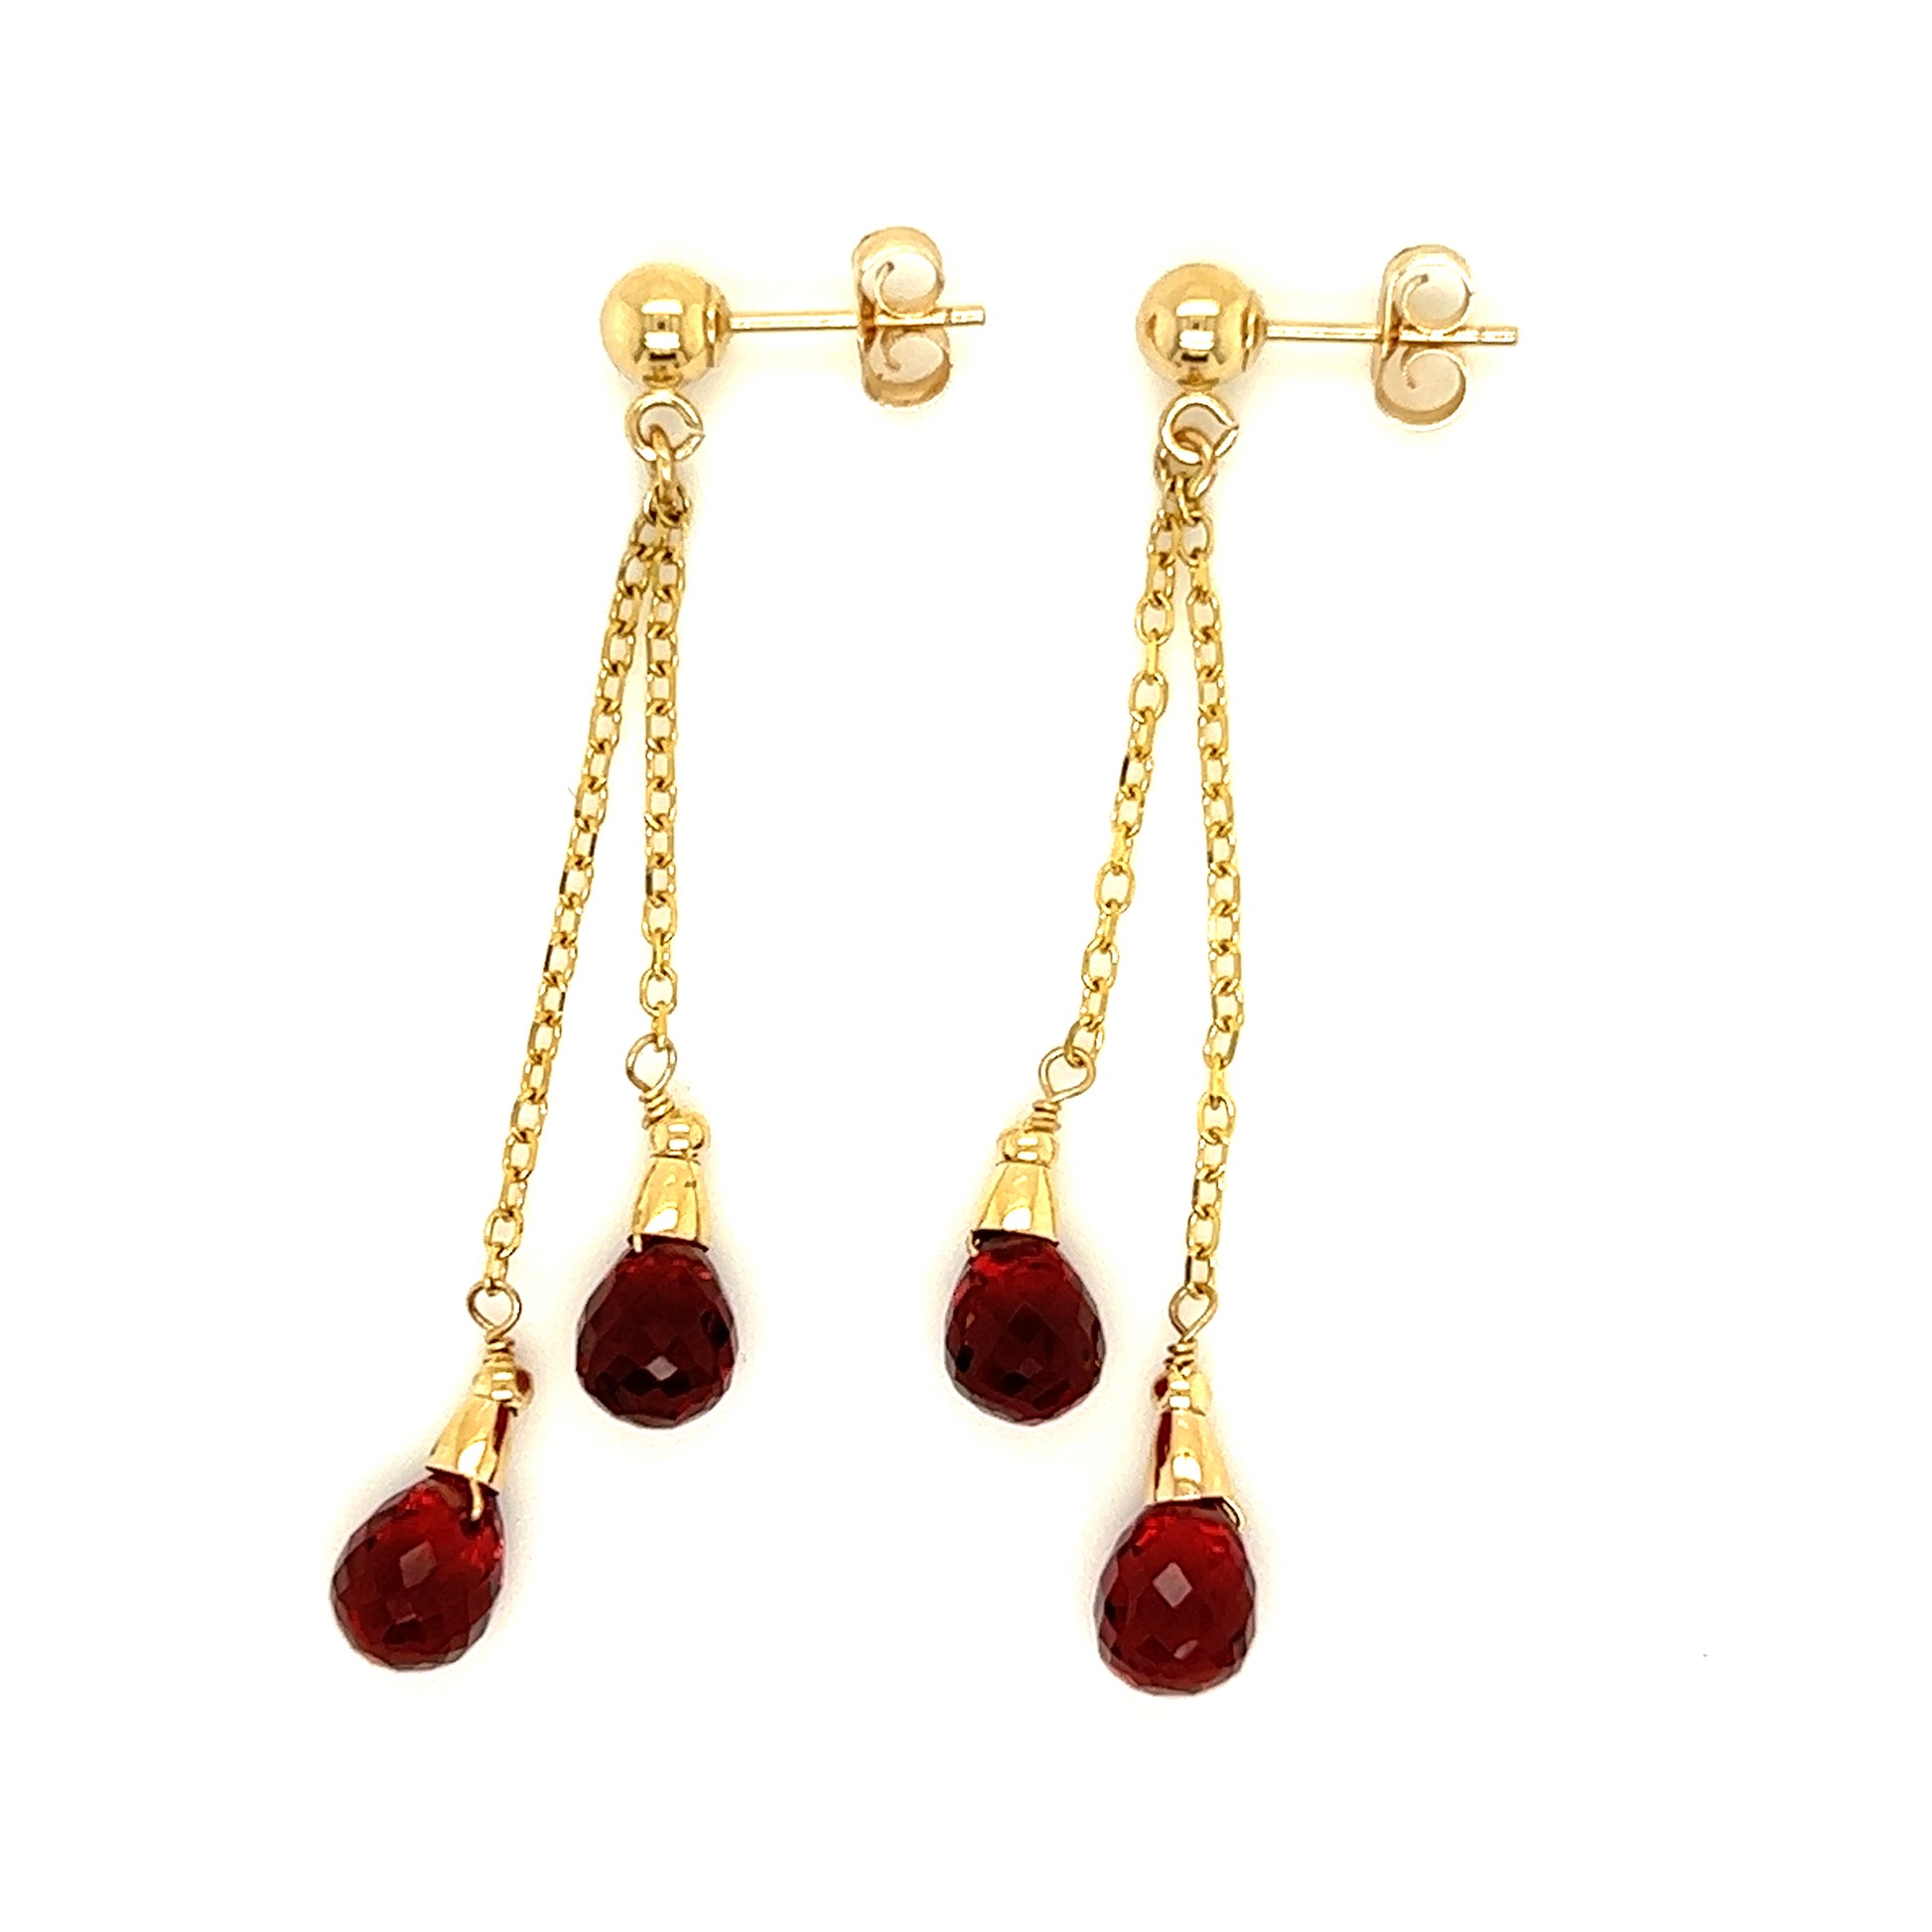 Teardrop Dangle Earrings with Four Garnets in 14K Yellow Gold Top Right Side View